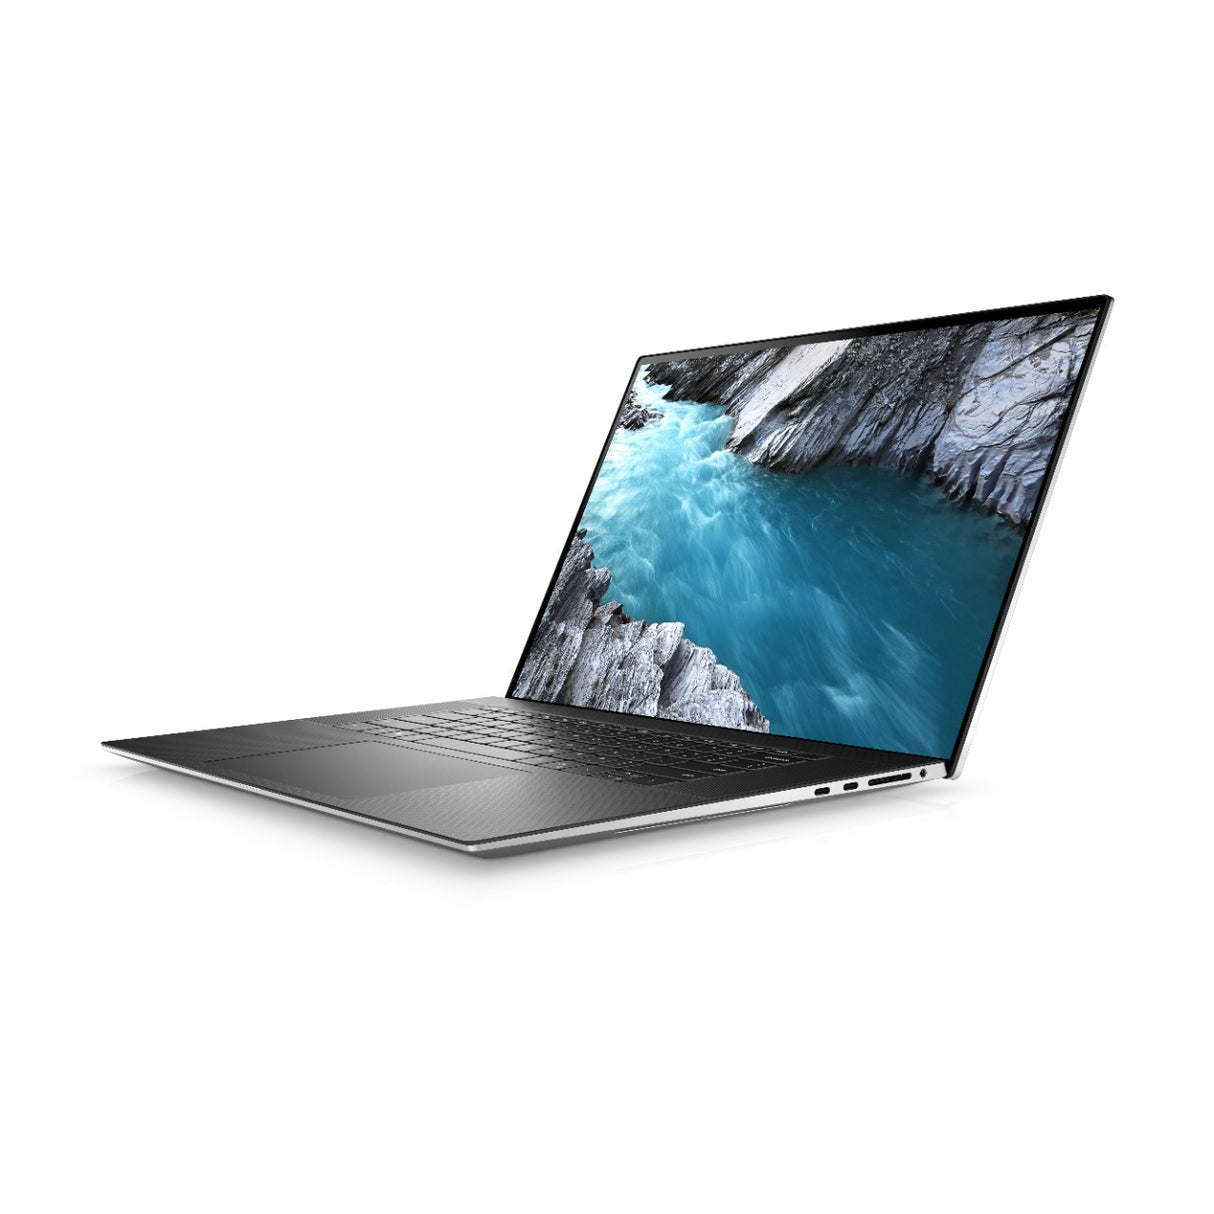 DELL XPS 17 9730 17" UHD+ NOTEBOOK